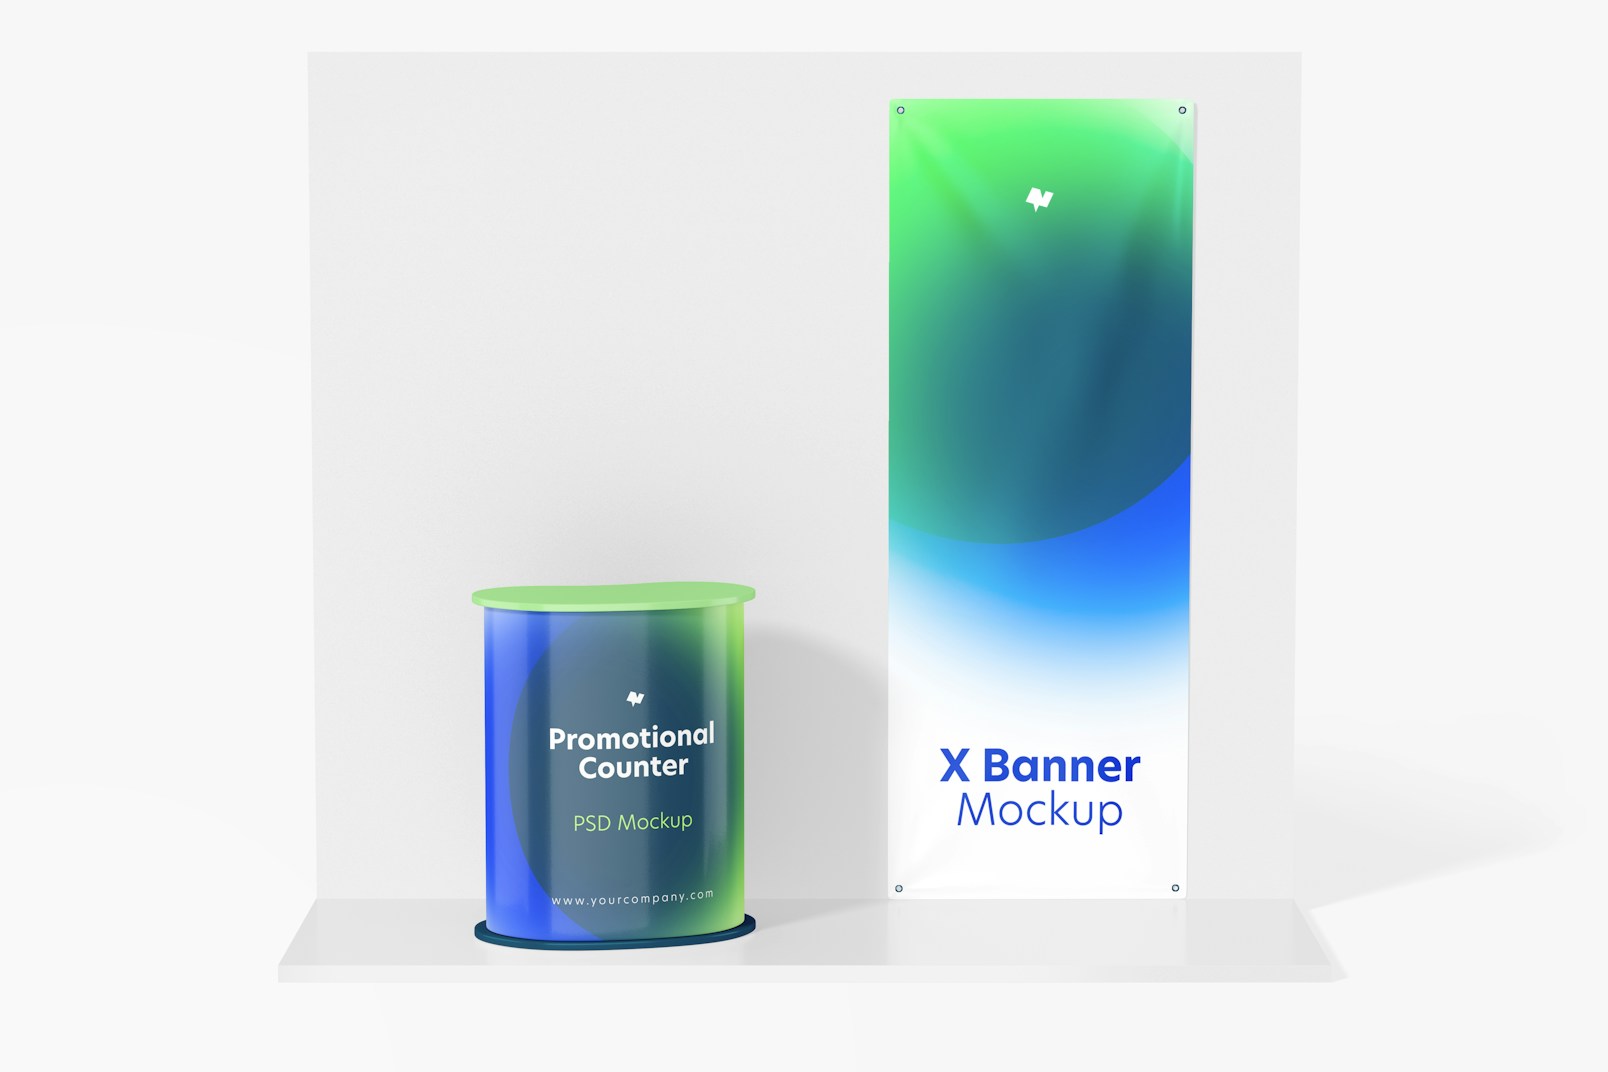 Promotional Counter with X Banner Mockup